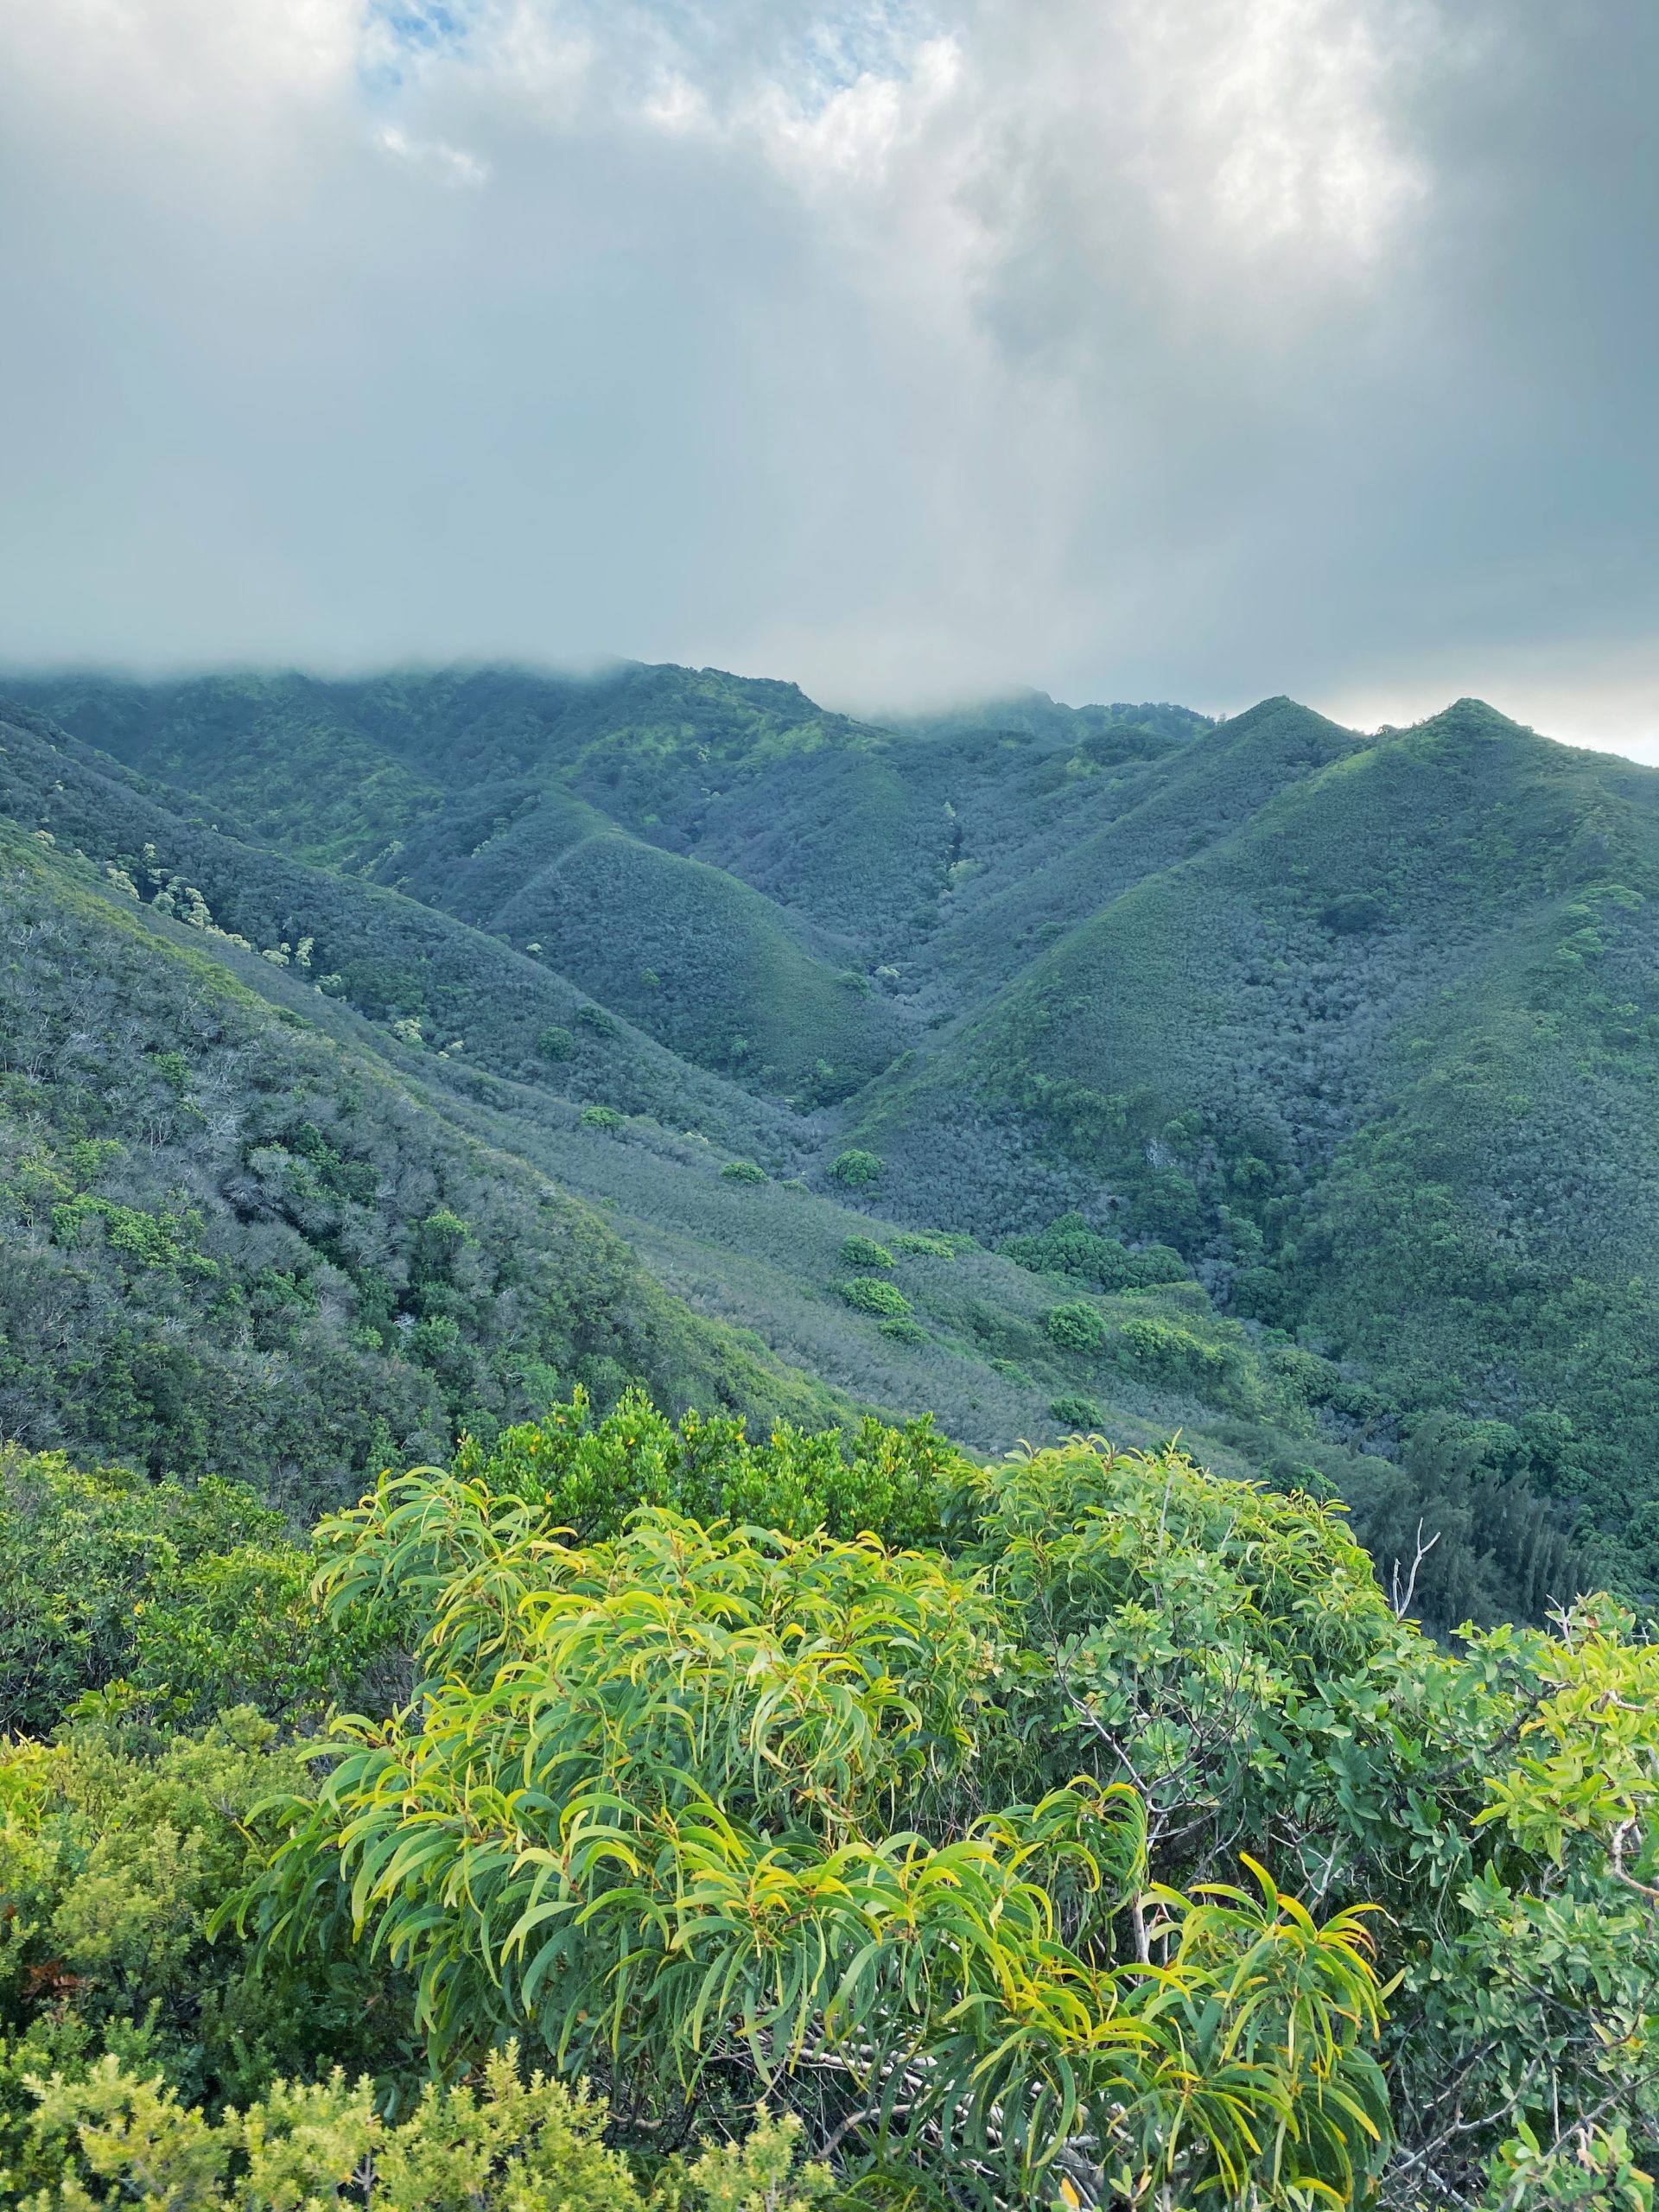 Top 5 most popular hikes on Oahu